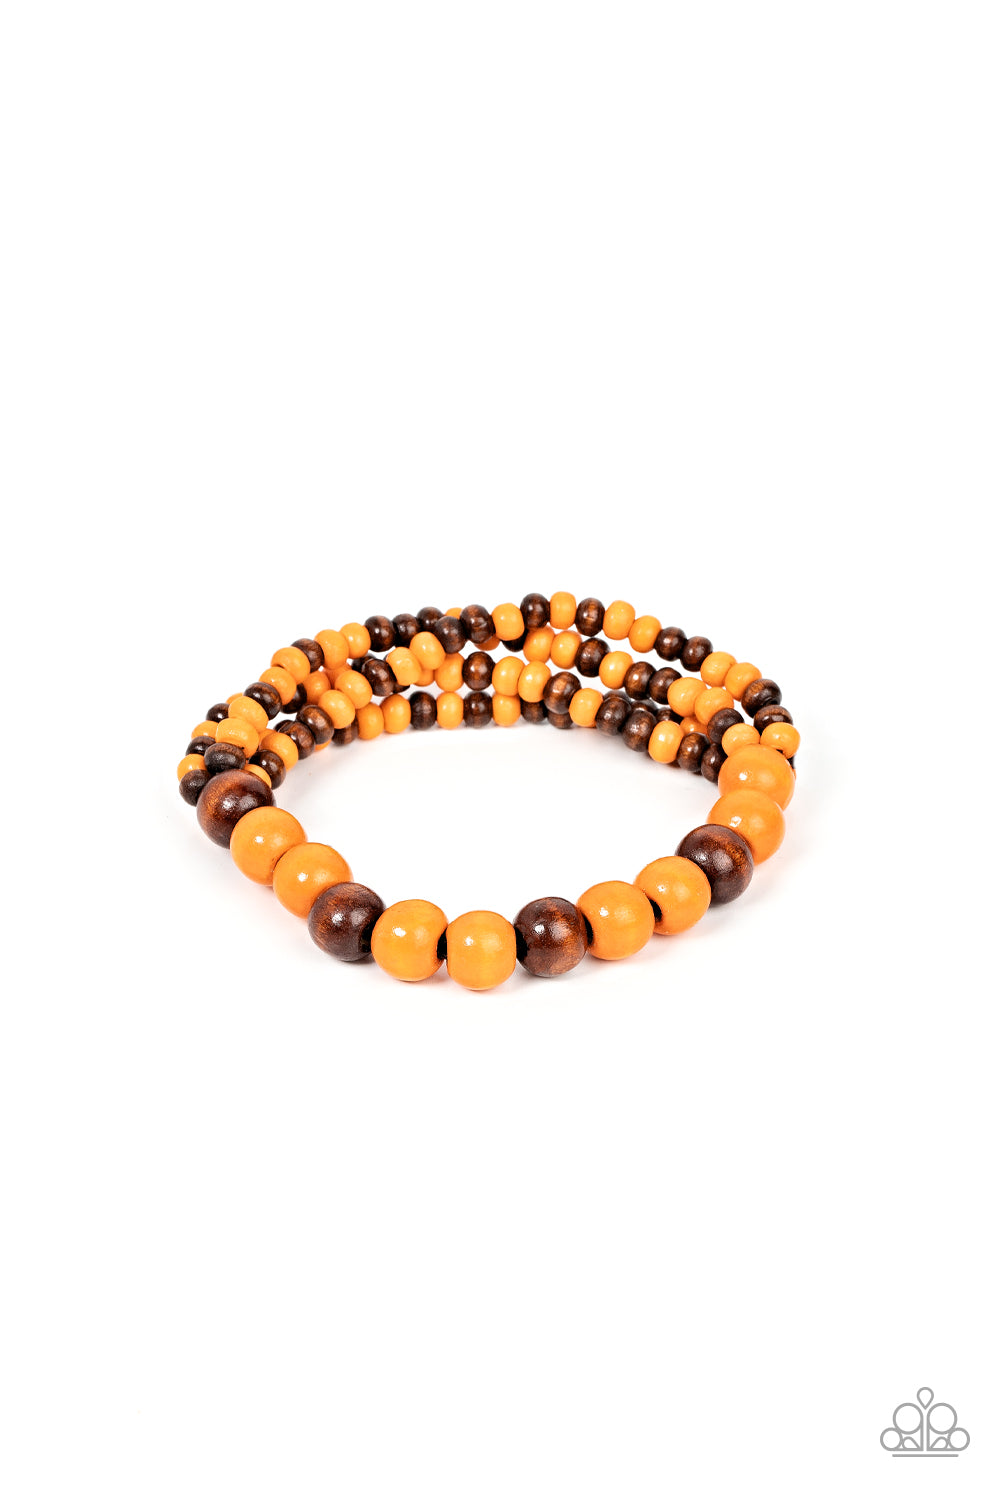 Oceania Oasis - Orange and Brown Wood Bracelet - Paparazzi Accessories - Stretchy strands of dainty brown and orange wood beads attach to a single strand of oversized brown and orange wood beads, resulting in colorful layers around the wrist.